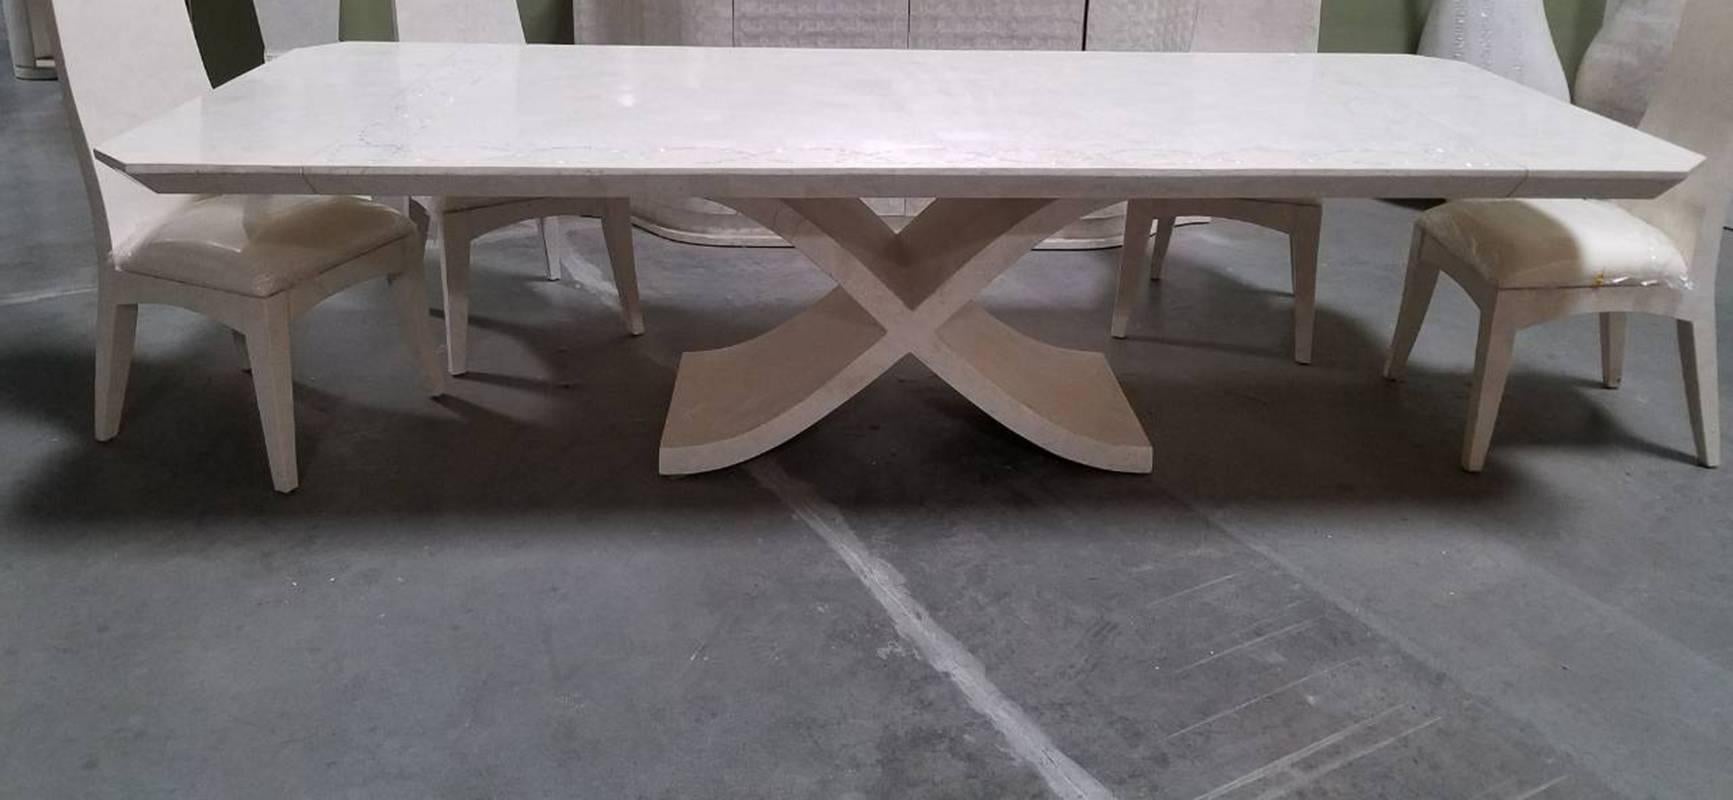 Large X Dining Table in White Tessellated Stone with Trocca Shell Inlay, 1990s In Excellent Condition For Sale In Los Angeles, CA